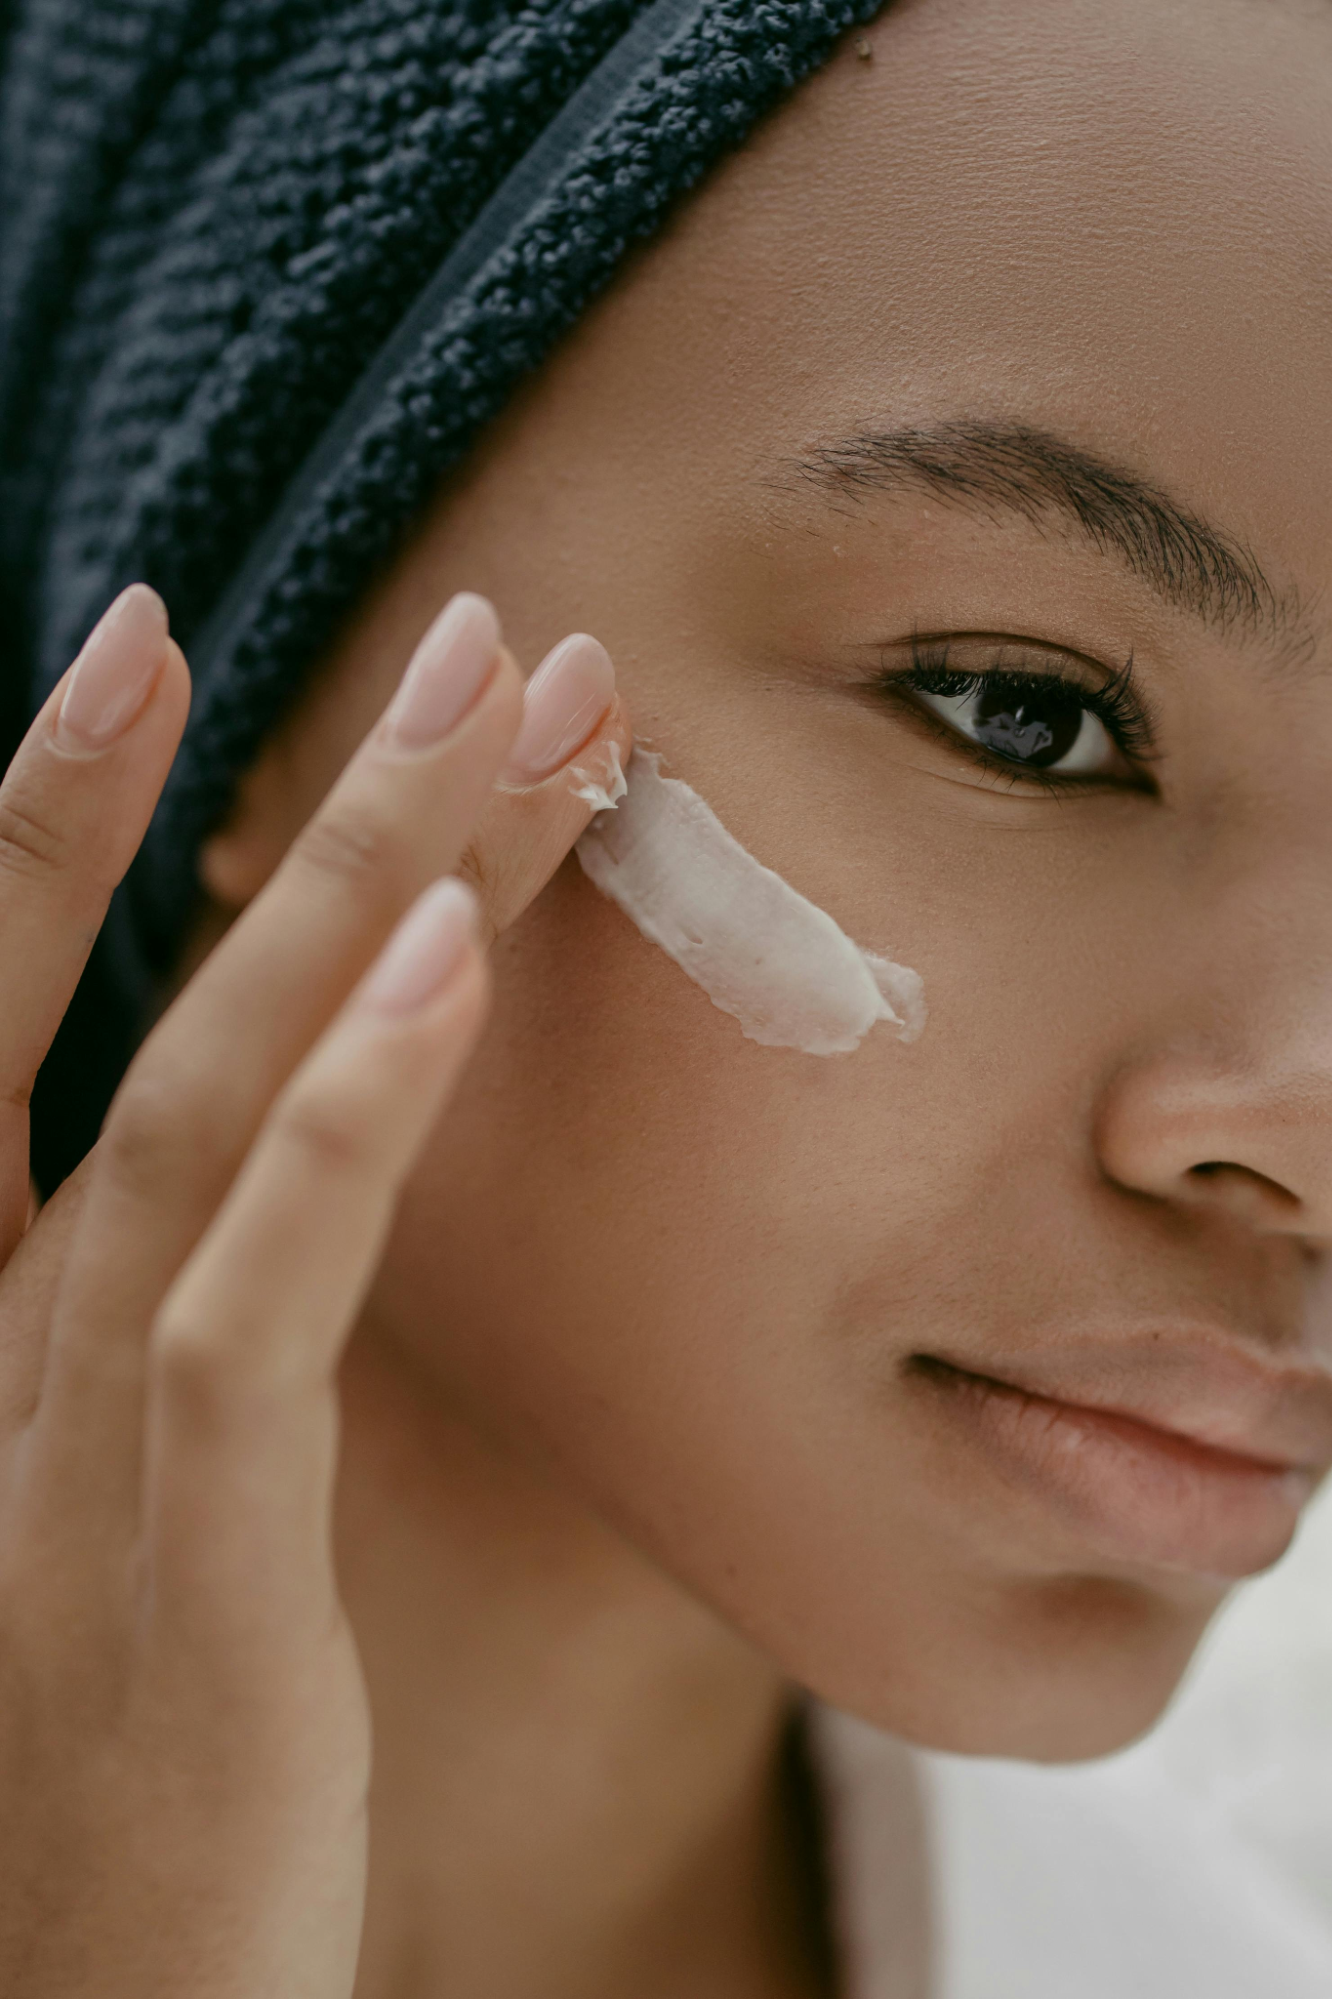 Pigmentation Cream Benefits: Why It's Essential for Your Skincare Routine?